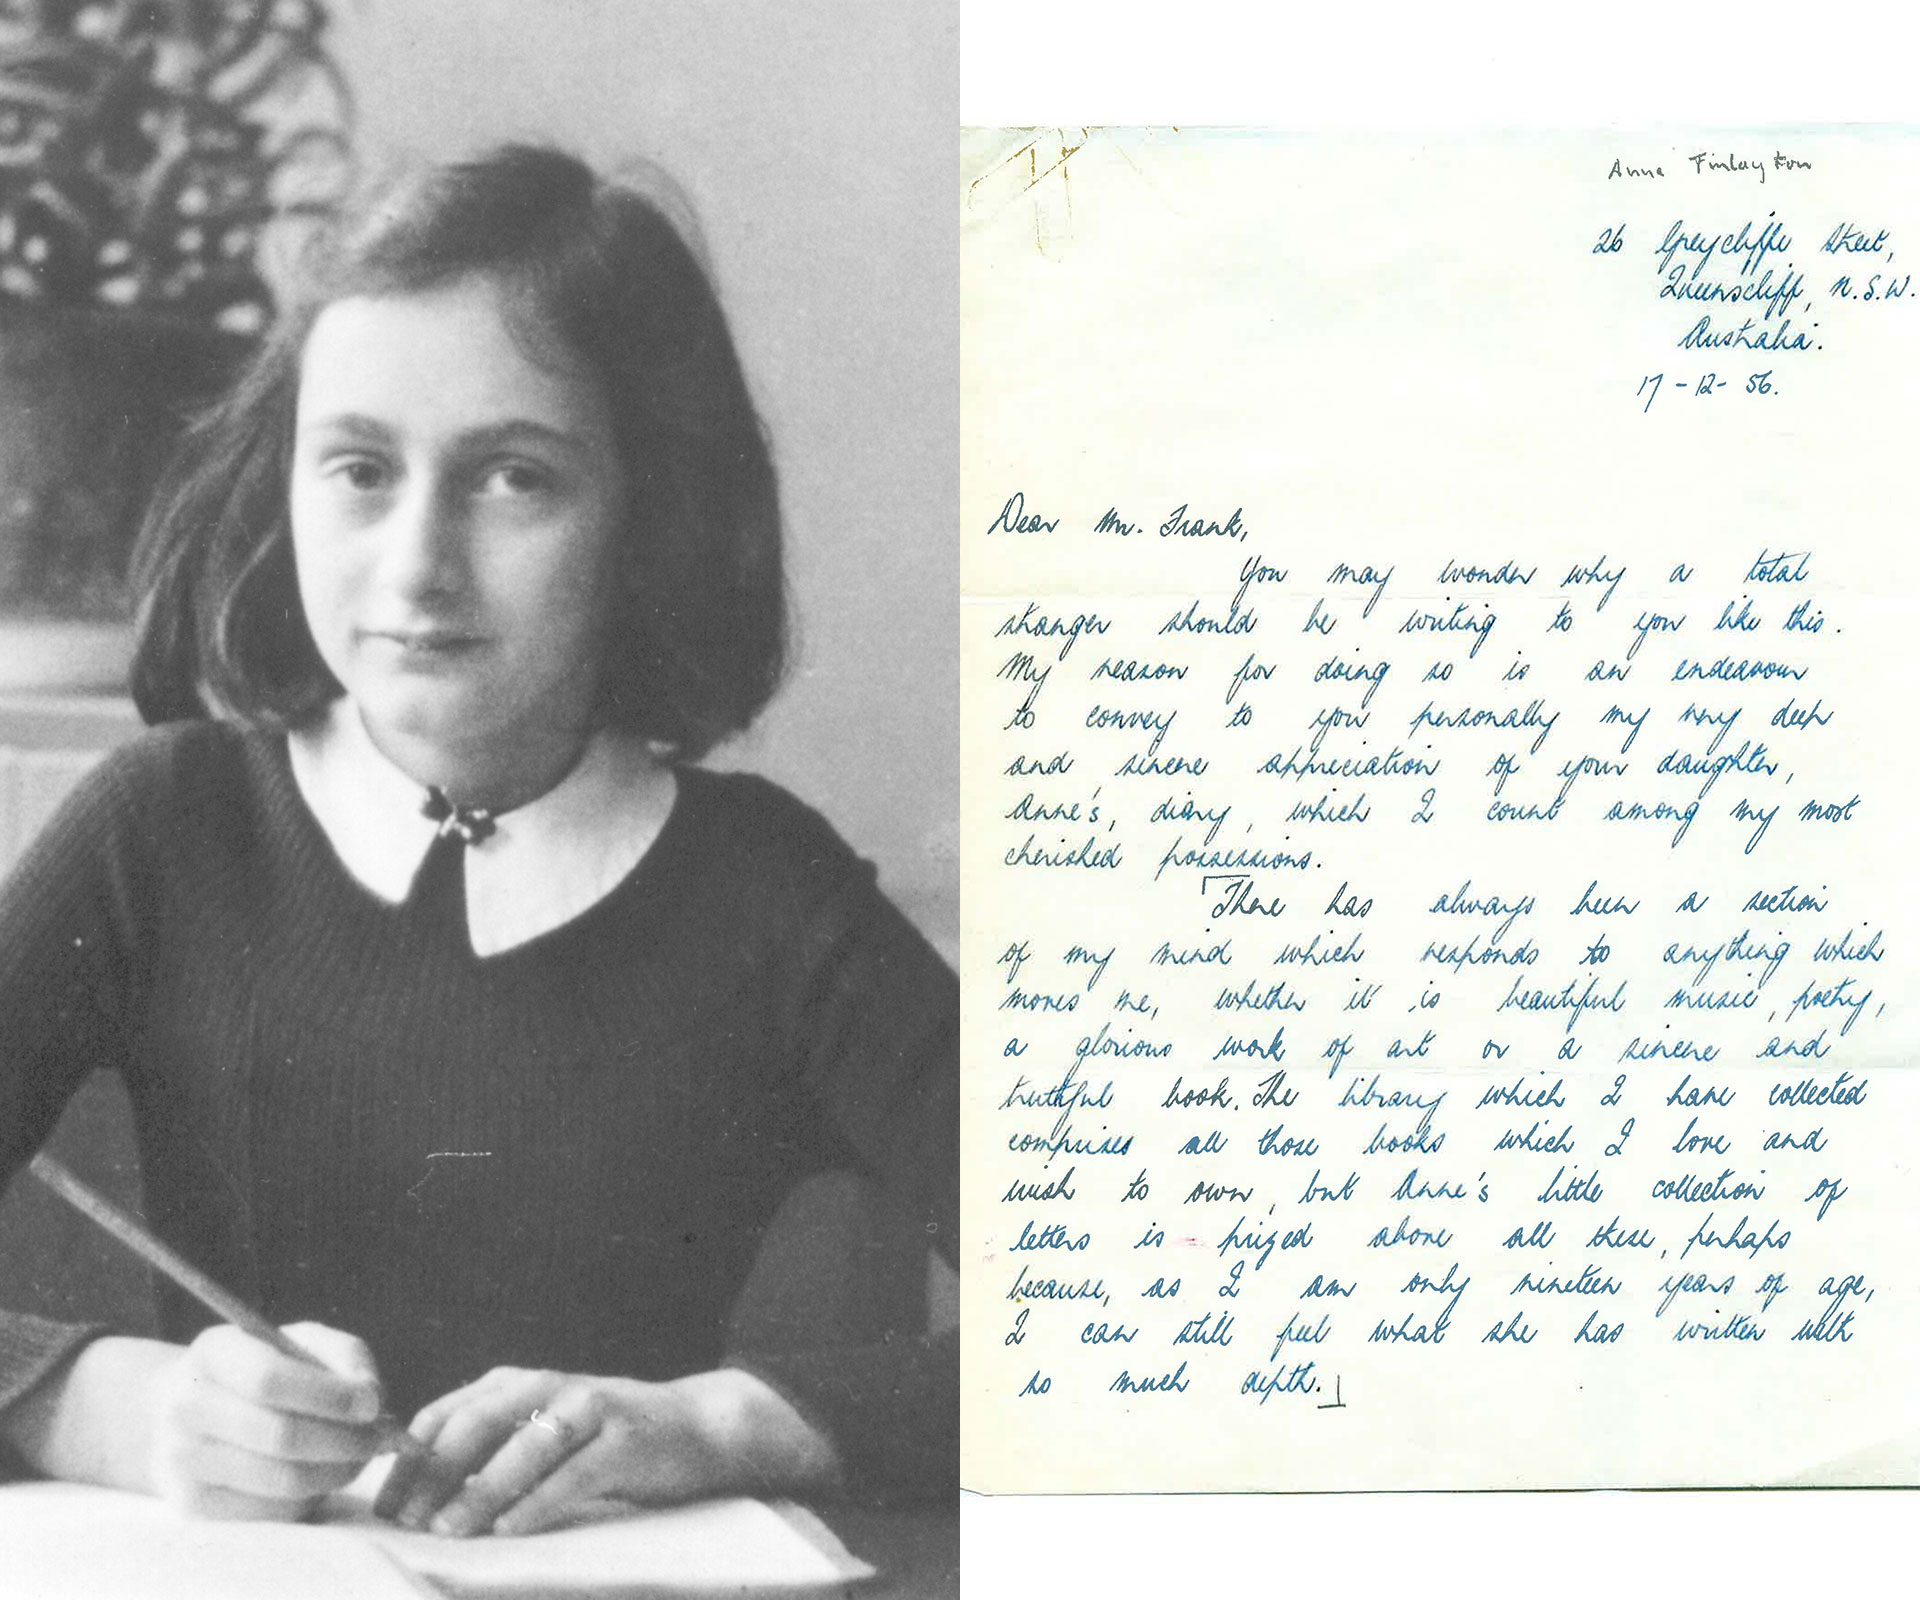 Anne Frank’s legacy: How an Aussie woman became Otto Frank’s confidante